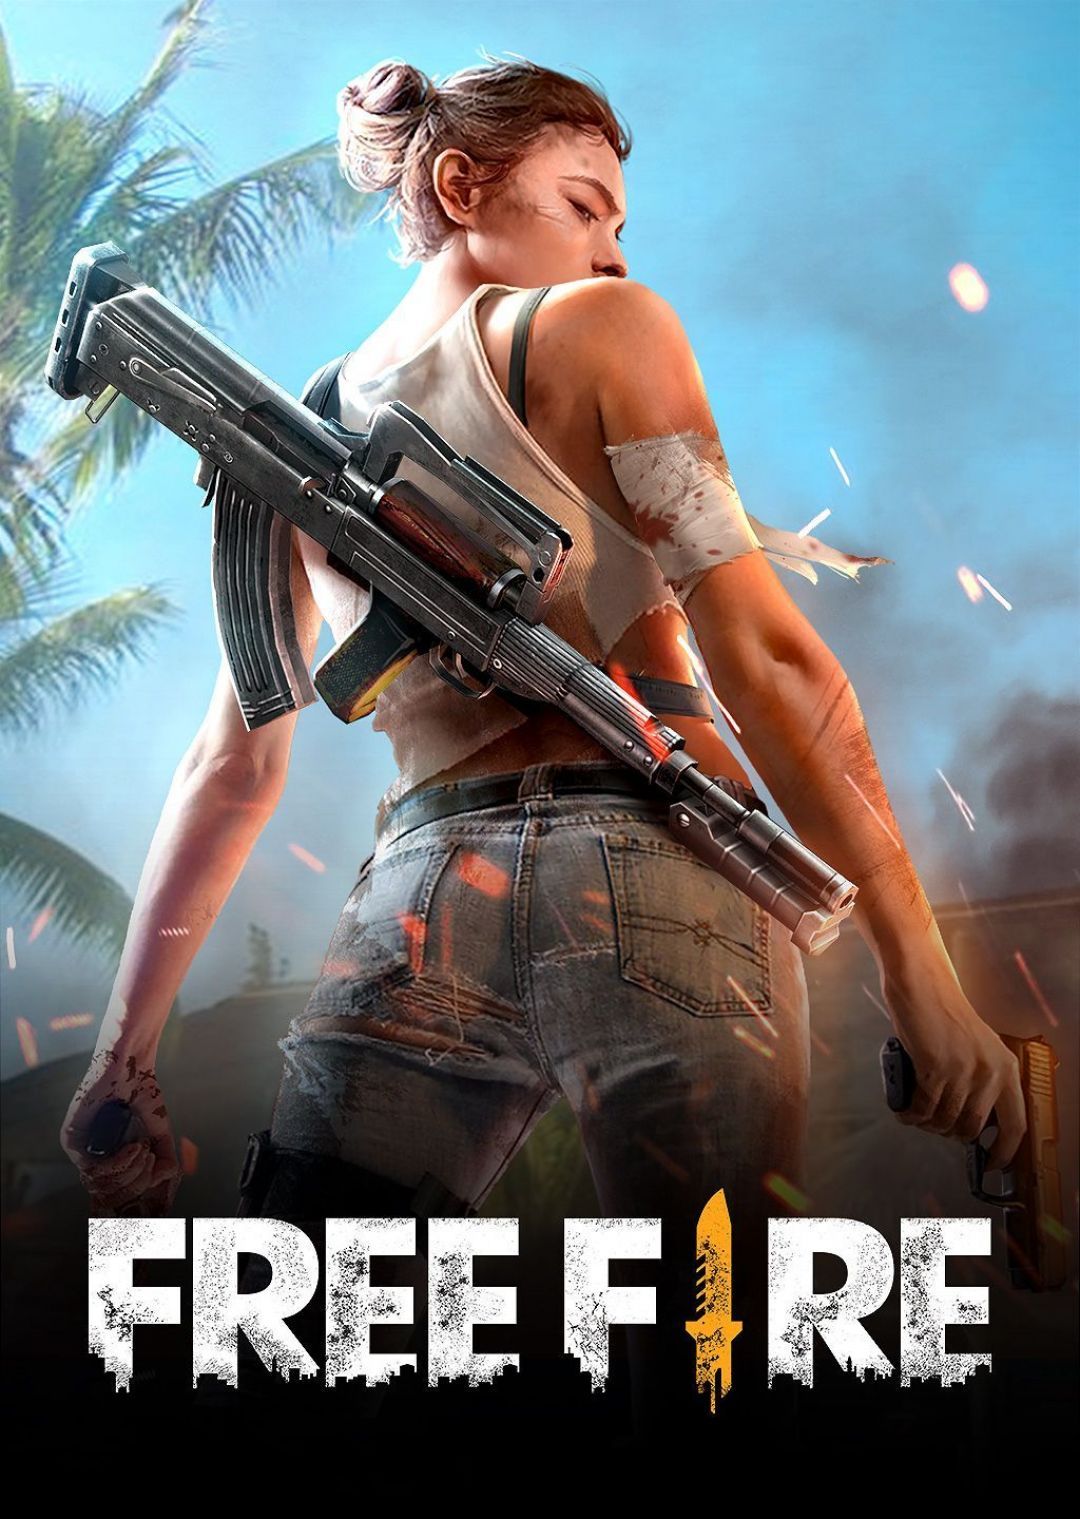 Garena Free Fire Image And Wallpaper Free Download